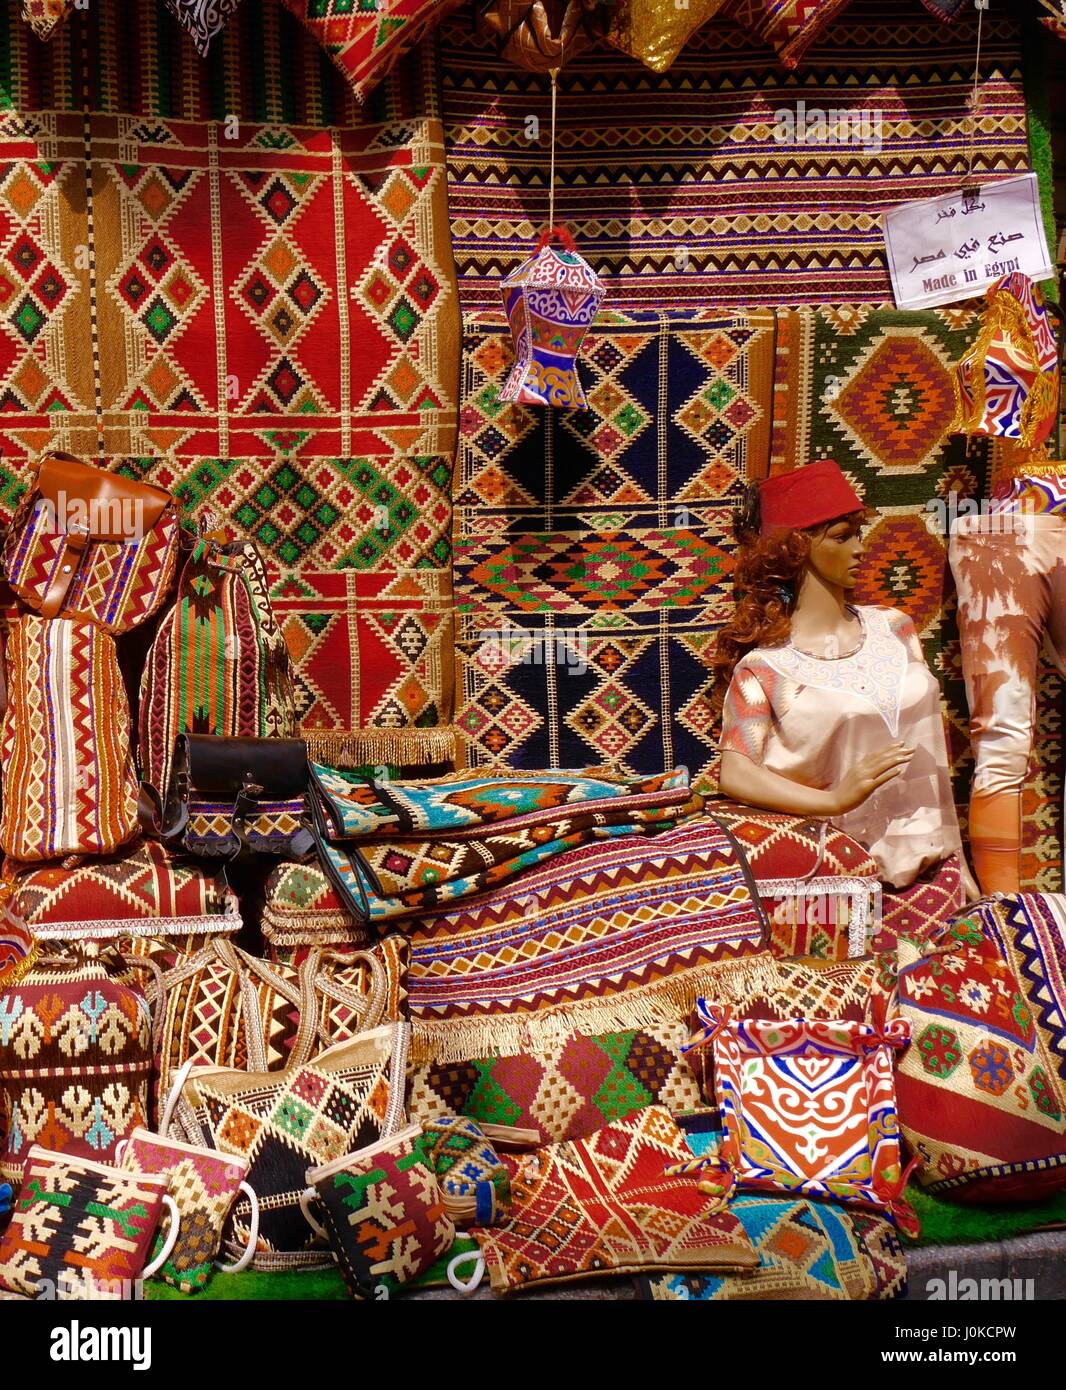 Varied display of traditional richly patterned carpets, rugs, cushion-covers, other textile souvenirs on sale in Khan al-Khalili bazaar, Cairo, Egypt Stock Photo